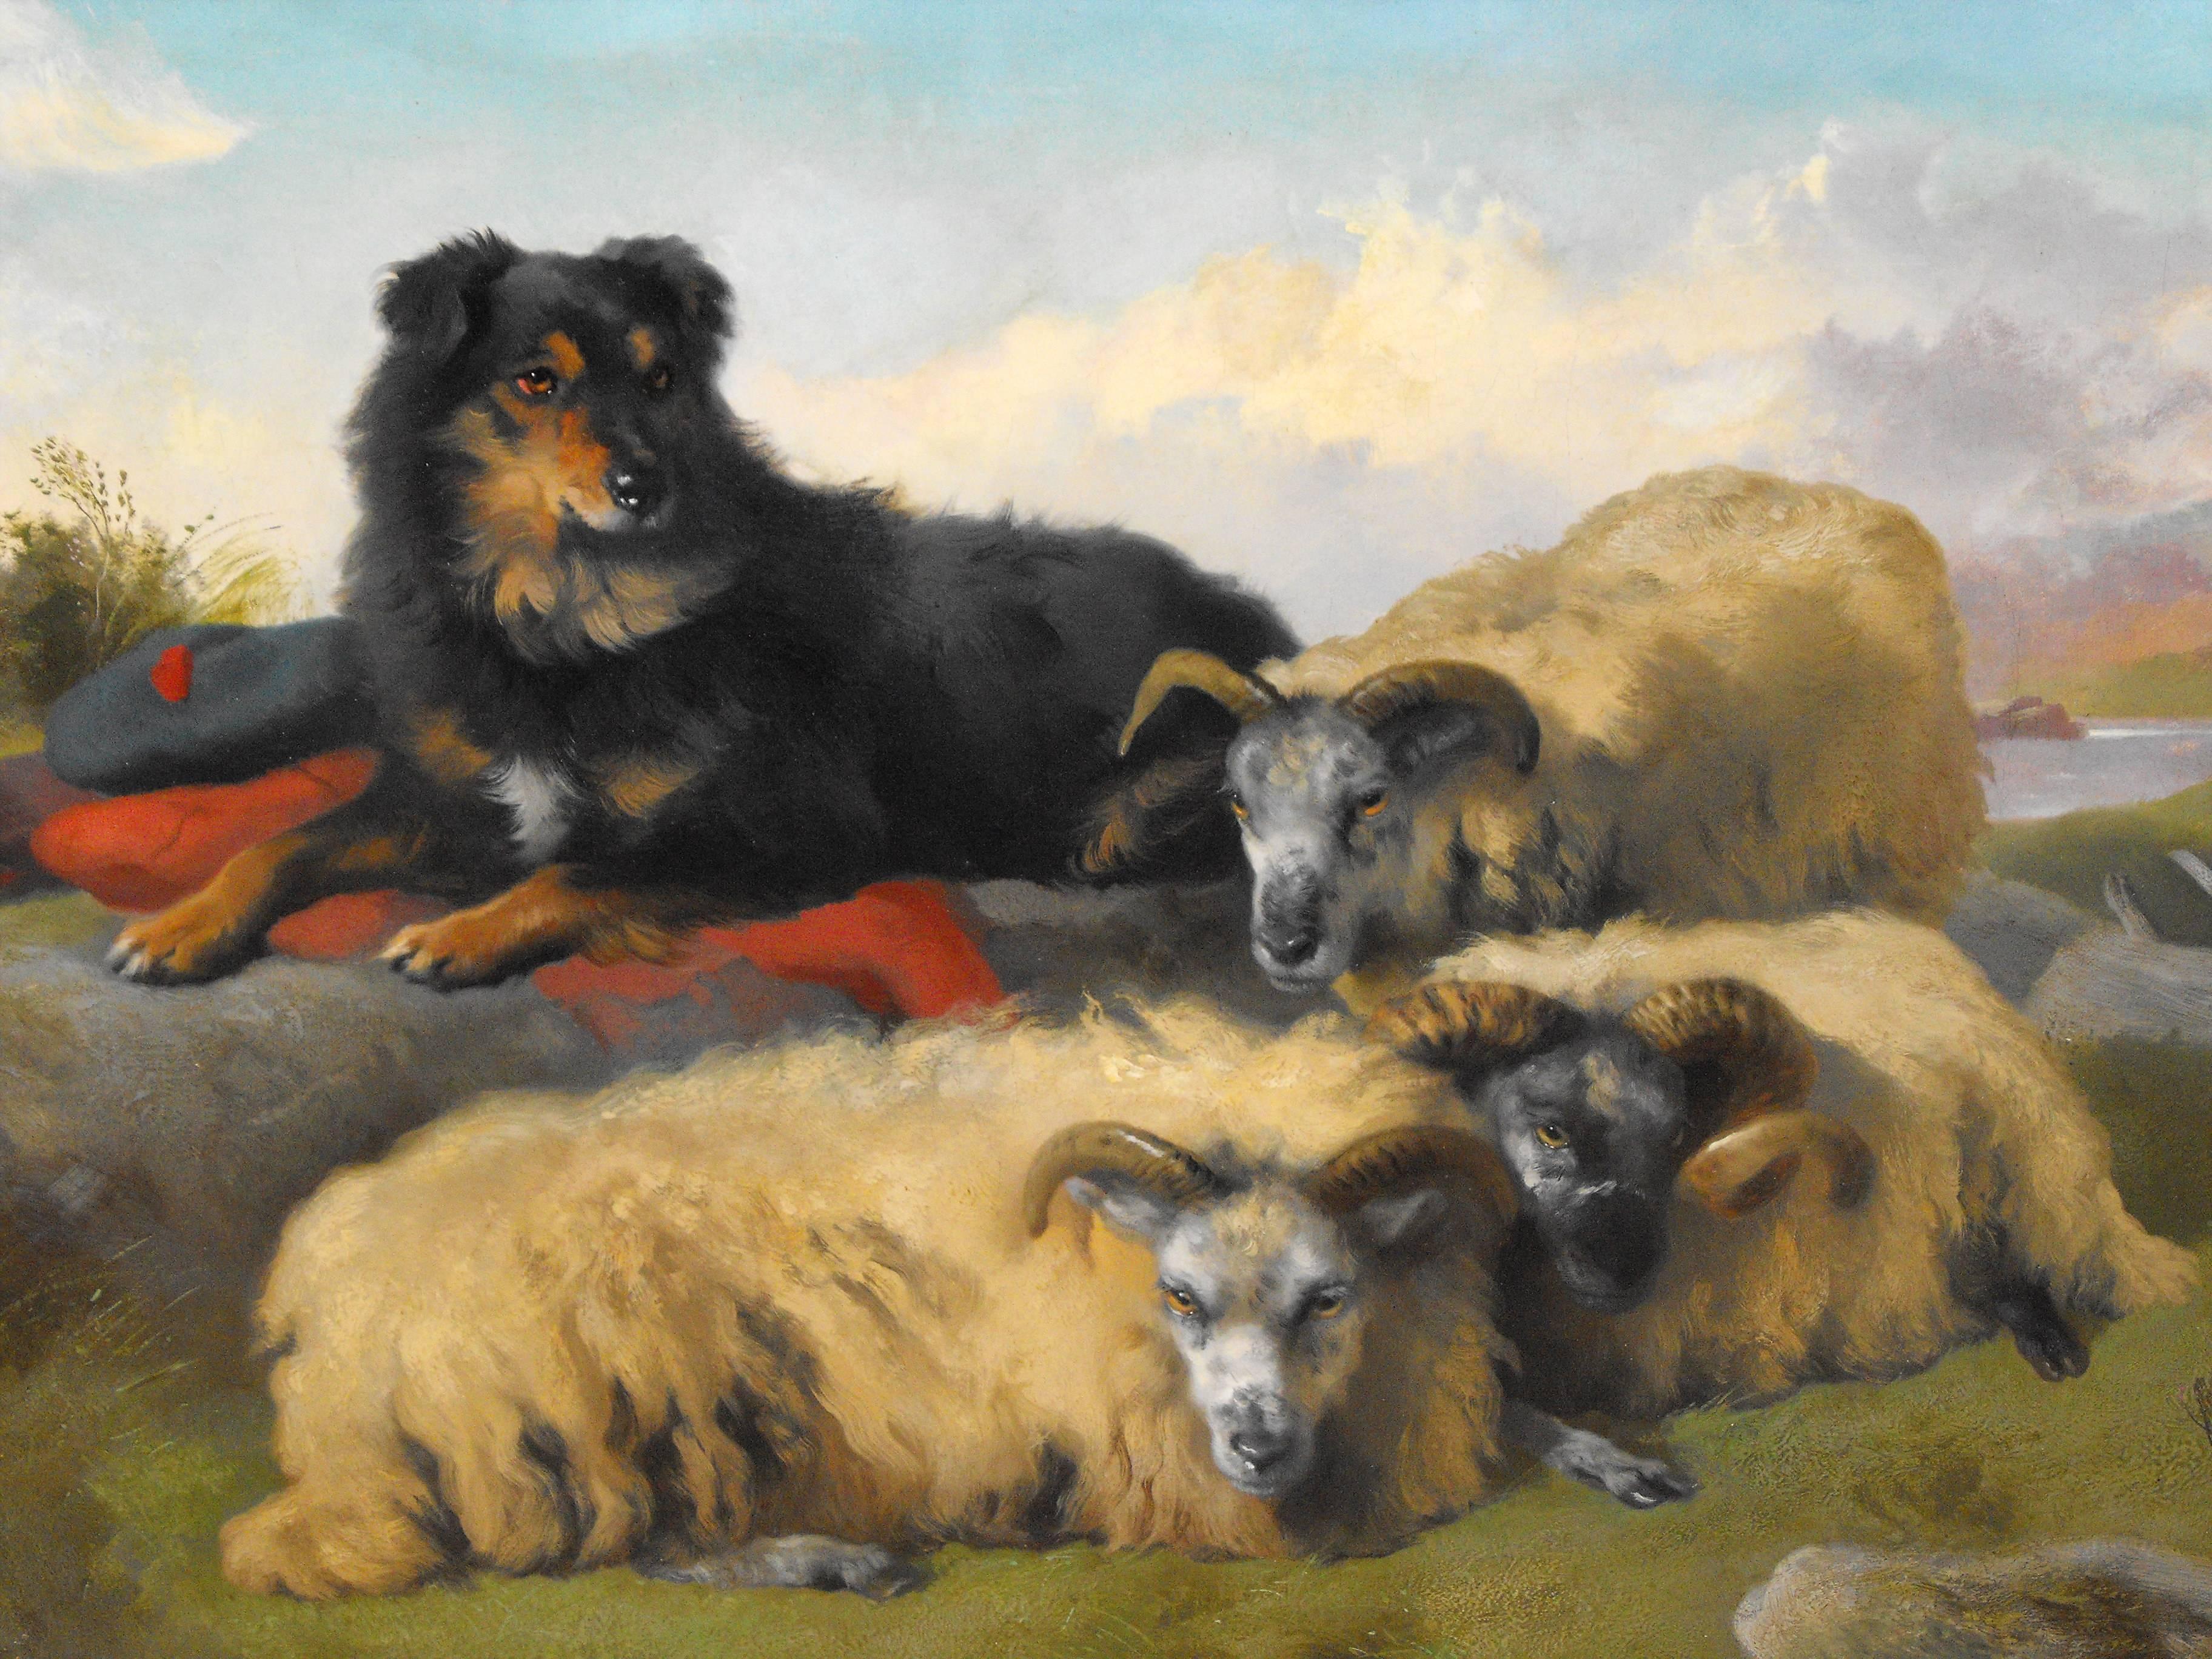 George William Horlor Landscape Painting - Antique Victorian oil painting landscape of sheep and sheep dog by Holgor 1870